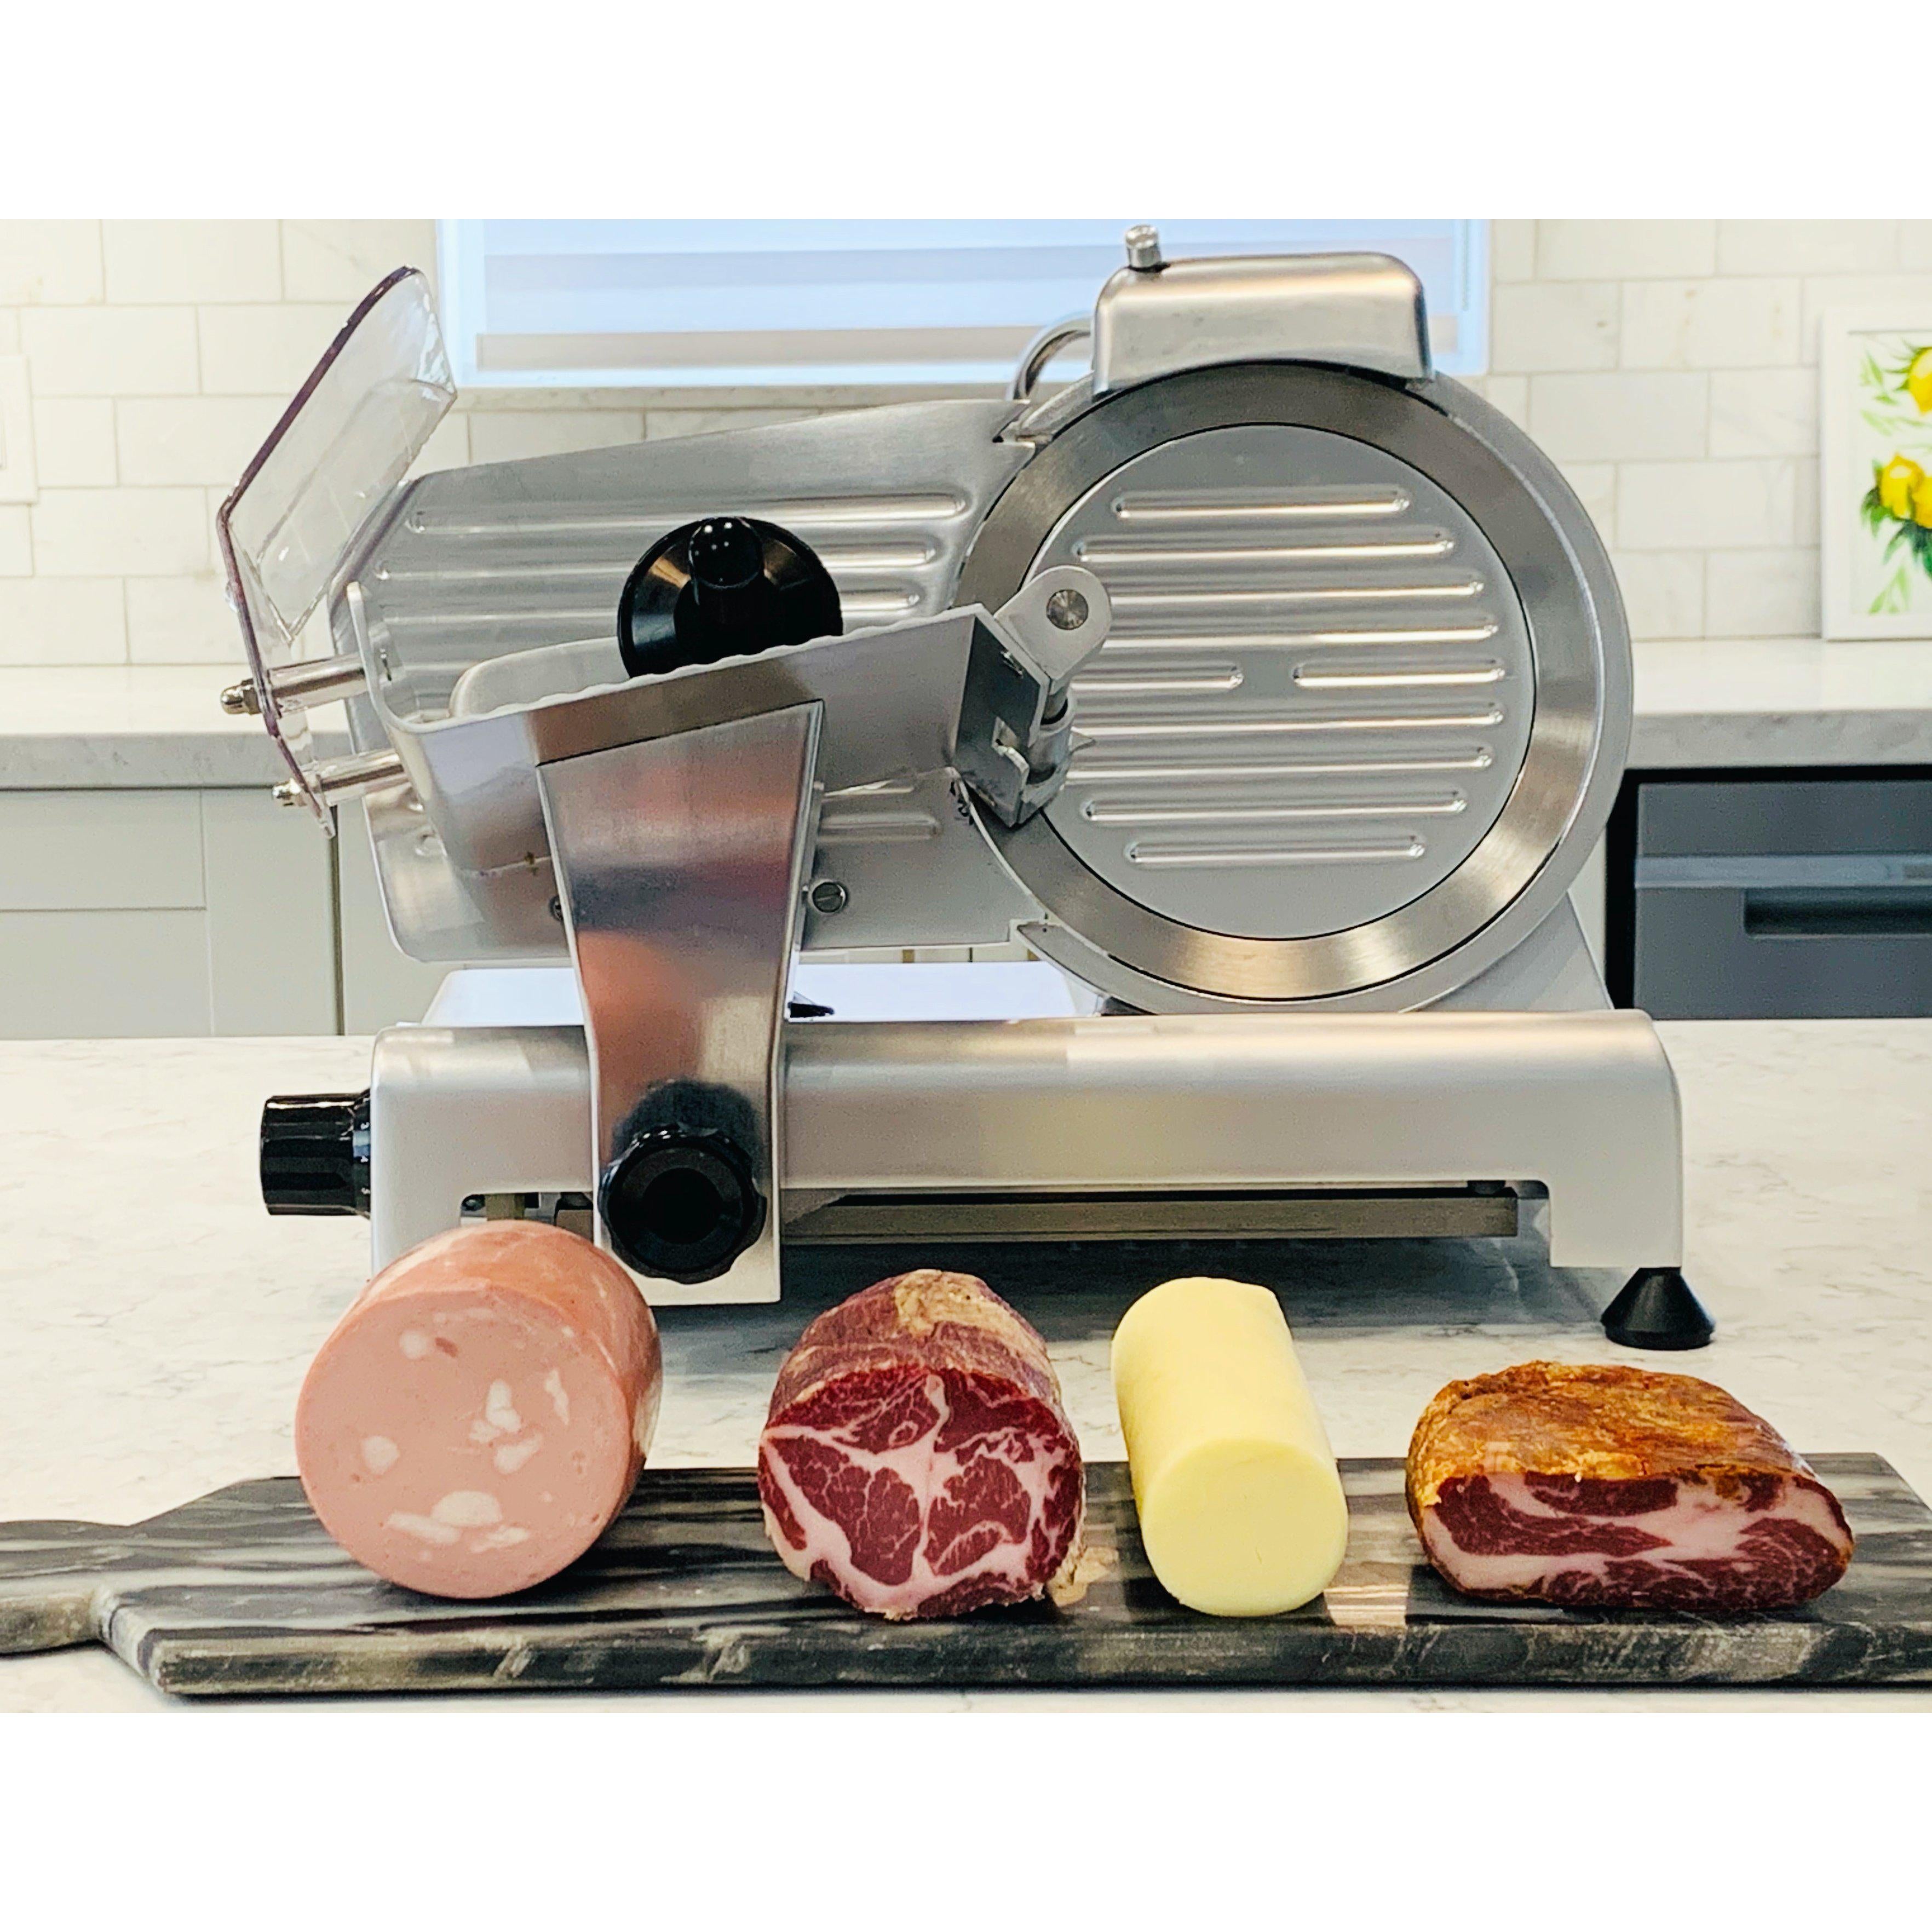 250ES - 10" Blade / .25HP Professional Semi Automatic Meat Slicer Meats and Cheese Canada